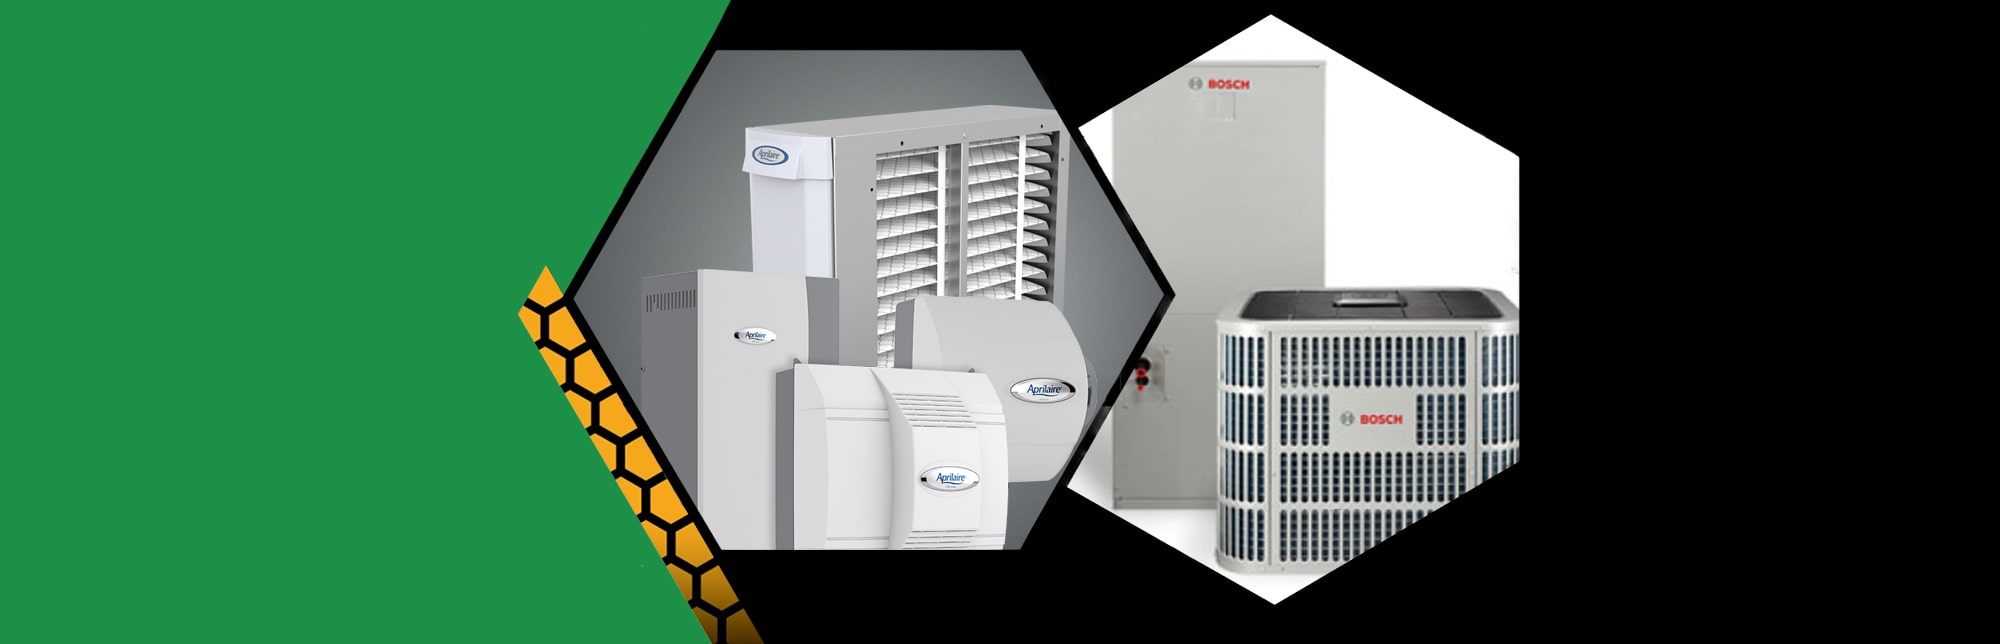 Live in Whiteland IN? Get your Aprilaire or Bosch AC units serviced  by Beeson Mechanical Service, Inc.